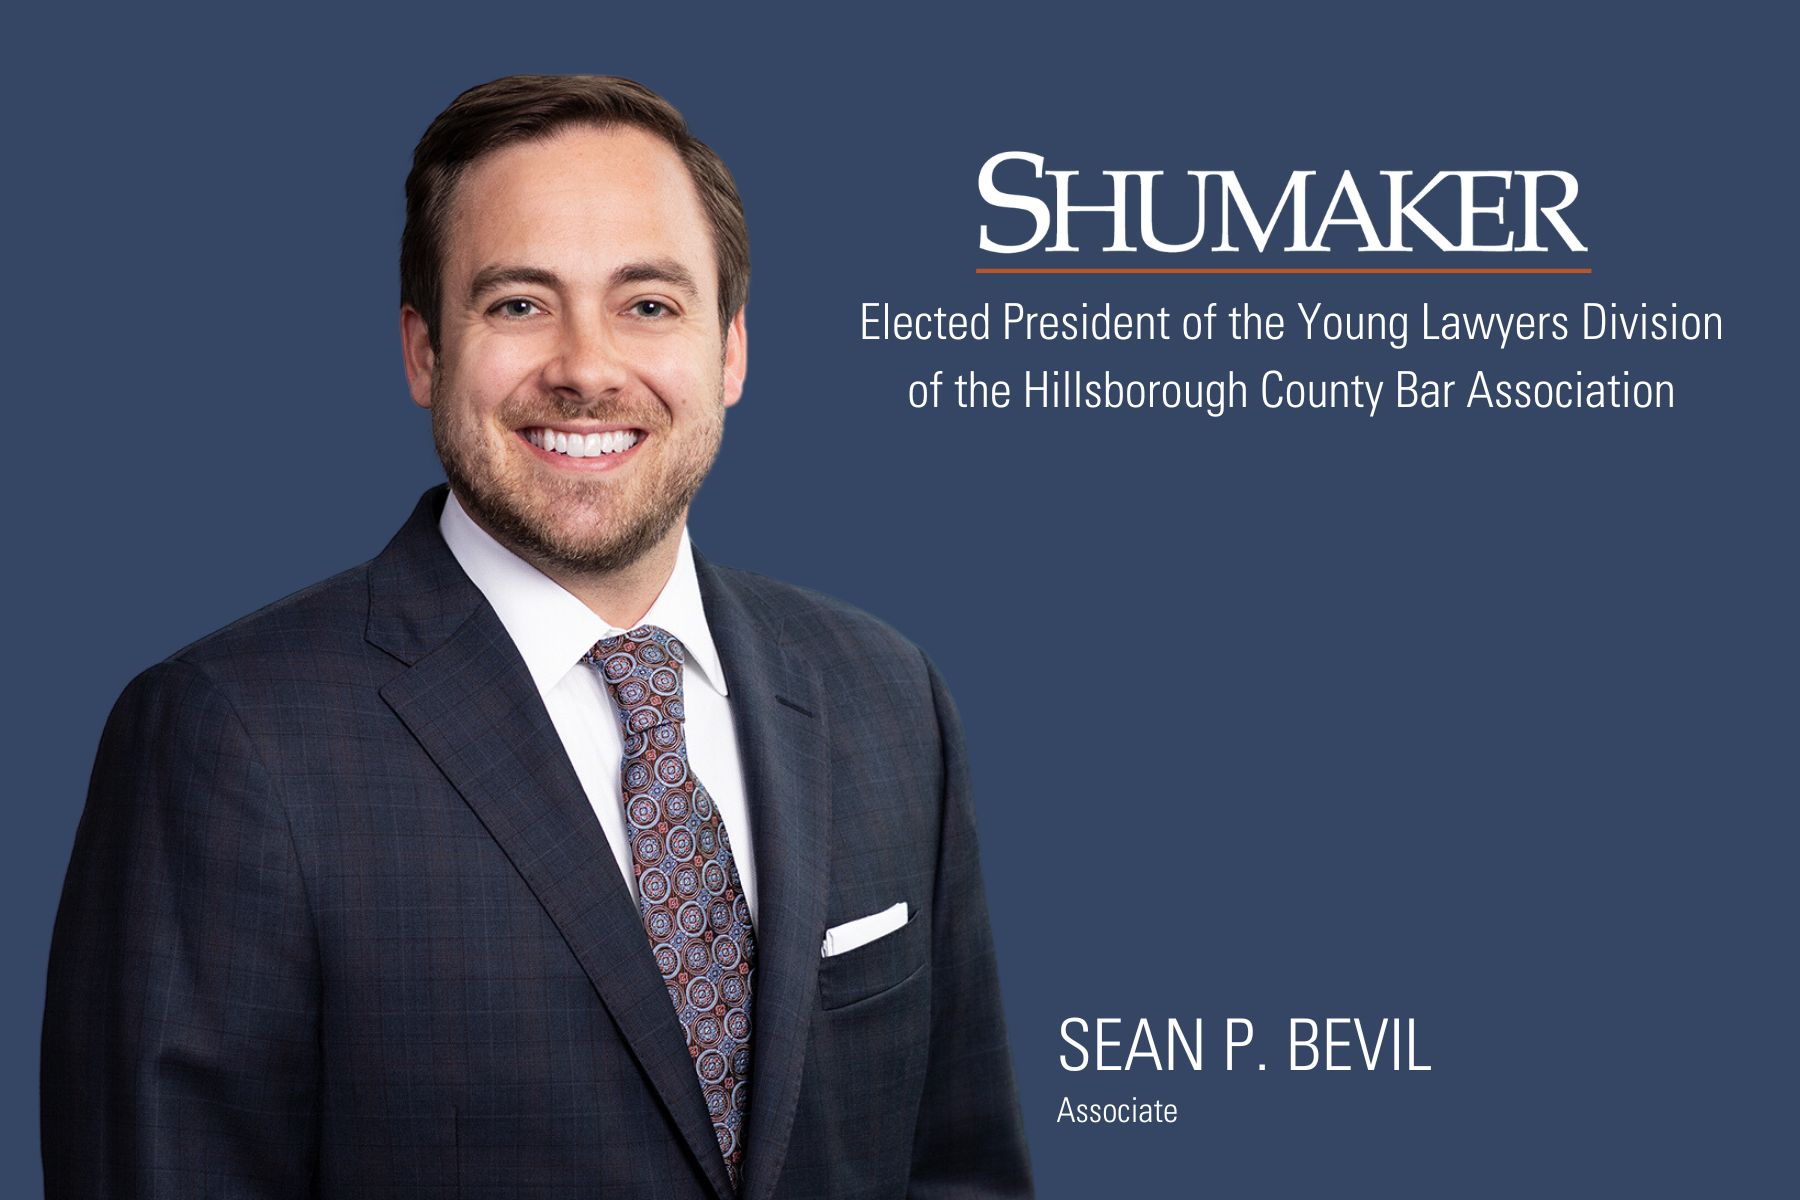 Sean P. Bevil Elected President of the Young Lawyers Division of the Hillsborough County Bar Association